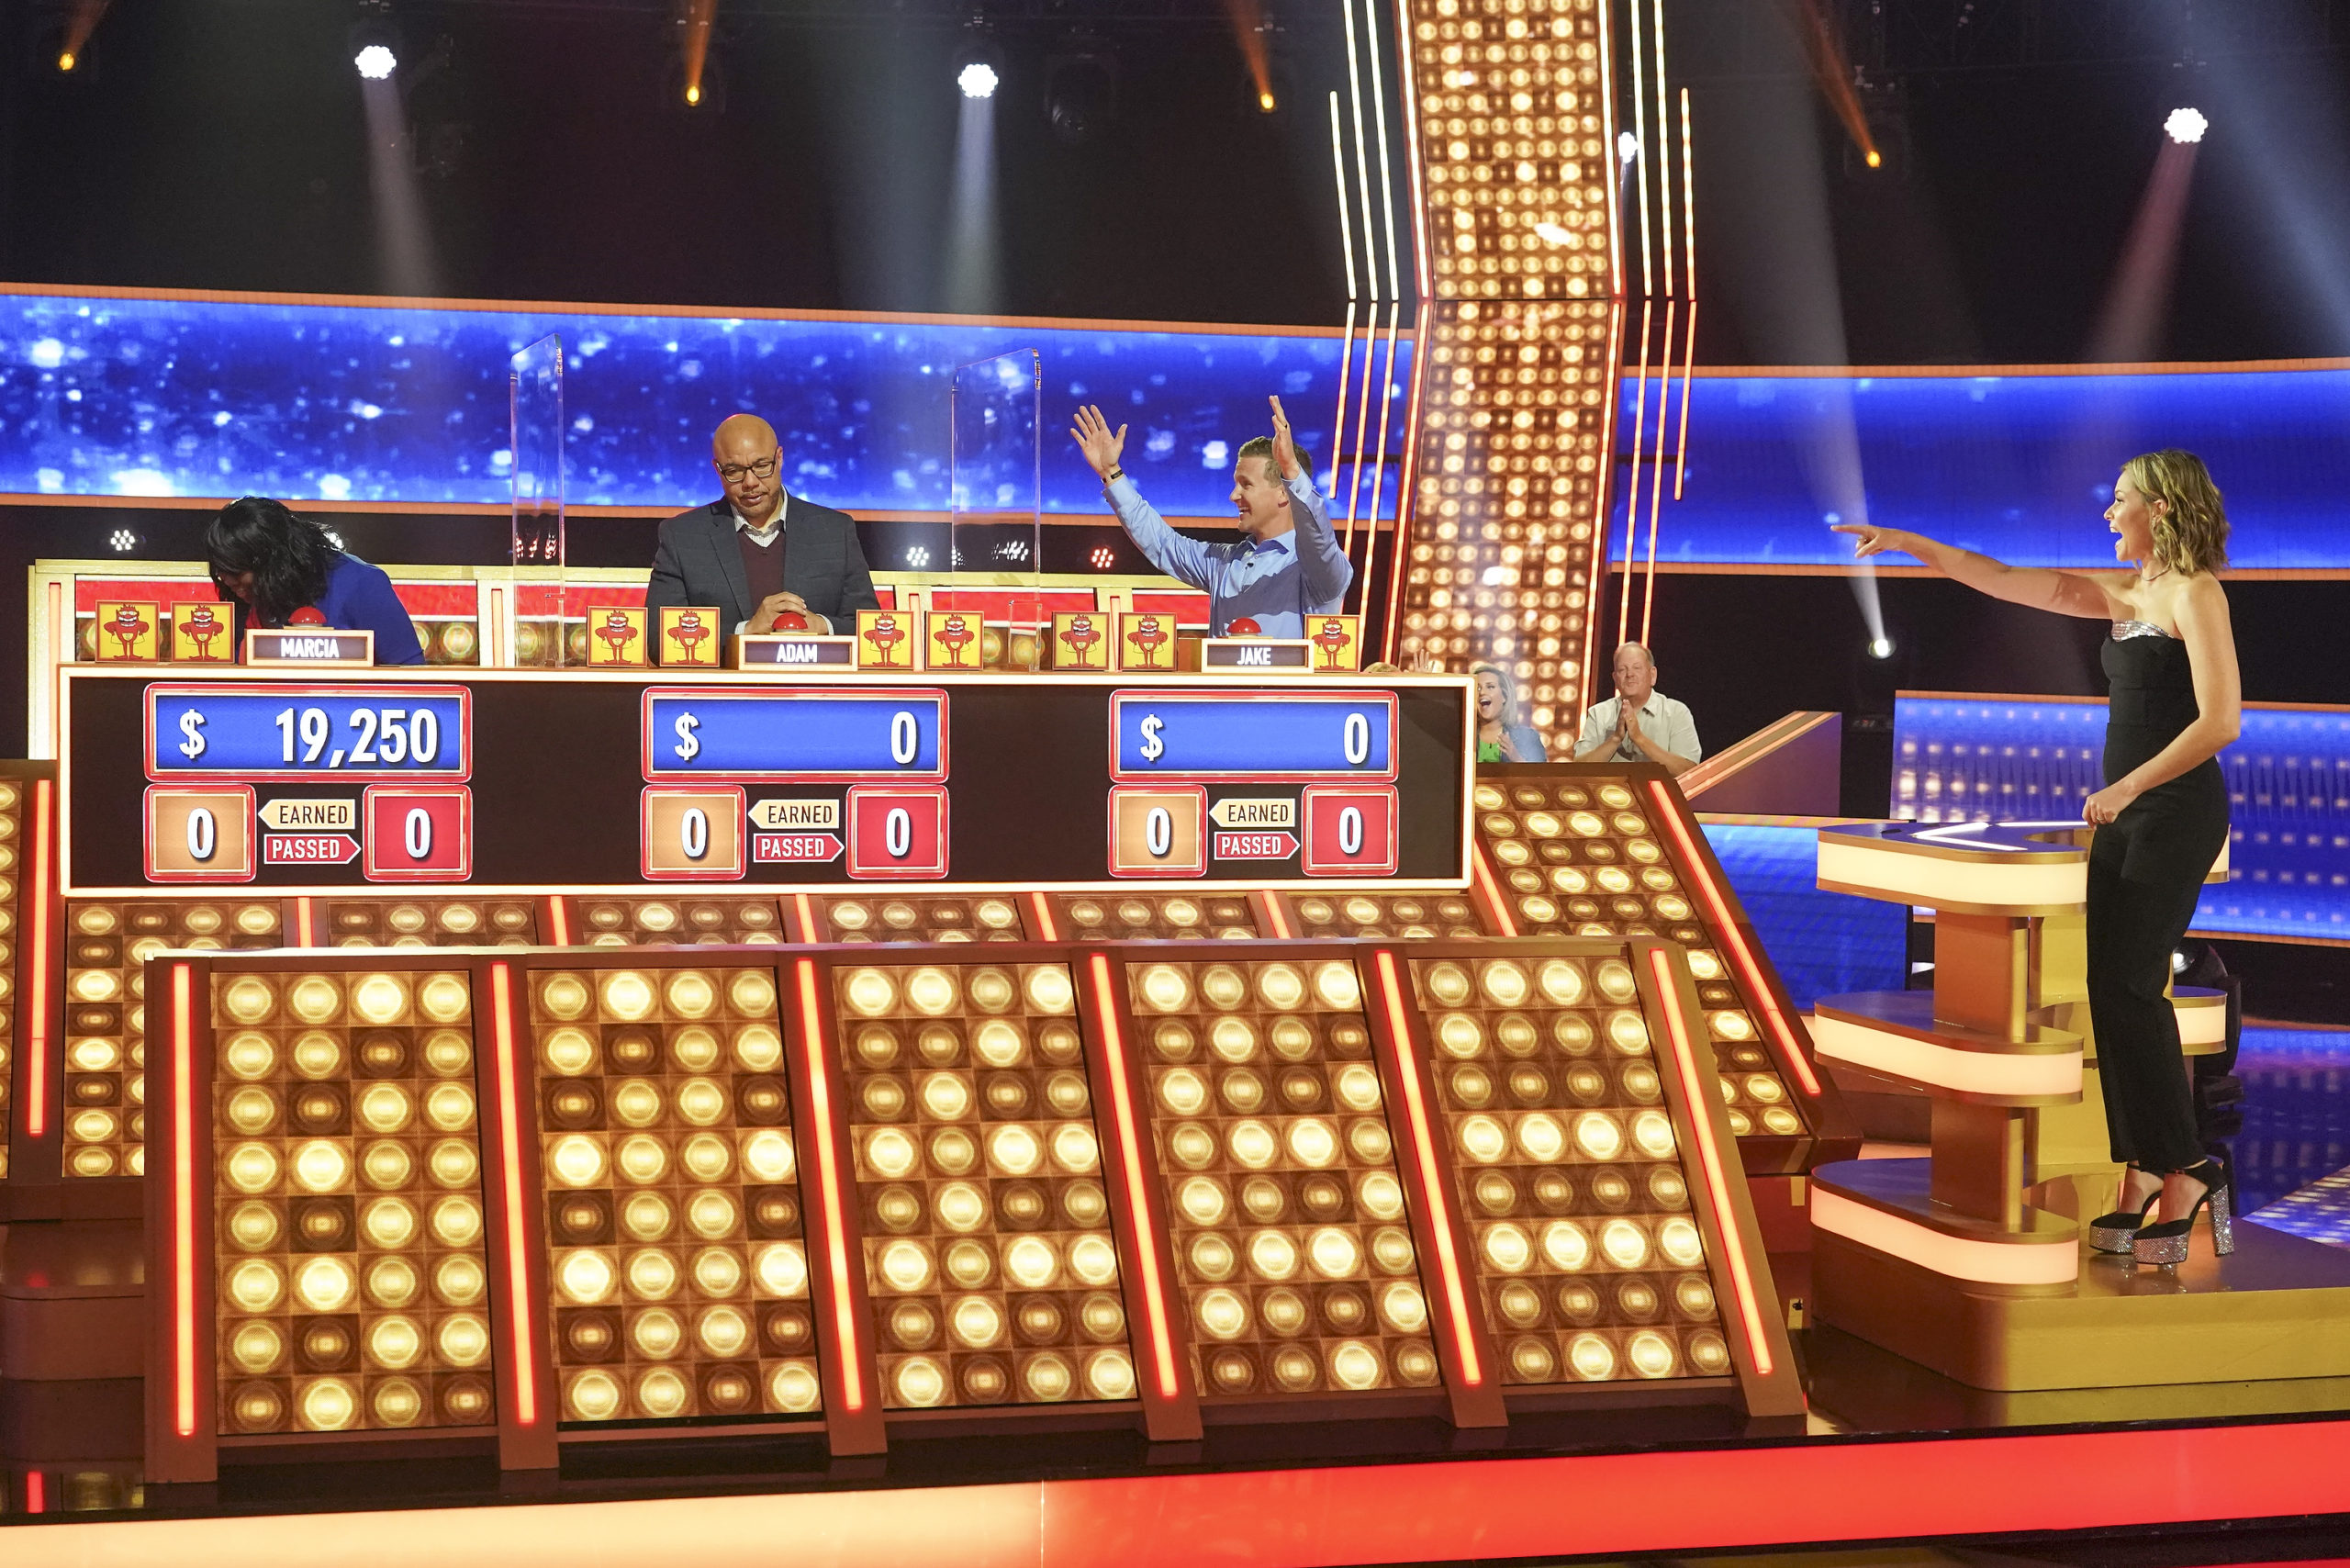 #Press Your Luck: Season Four; ABC Game Show Renewal and Summer 2022 Premiere Revealed